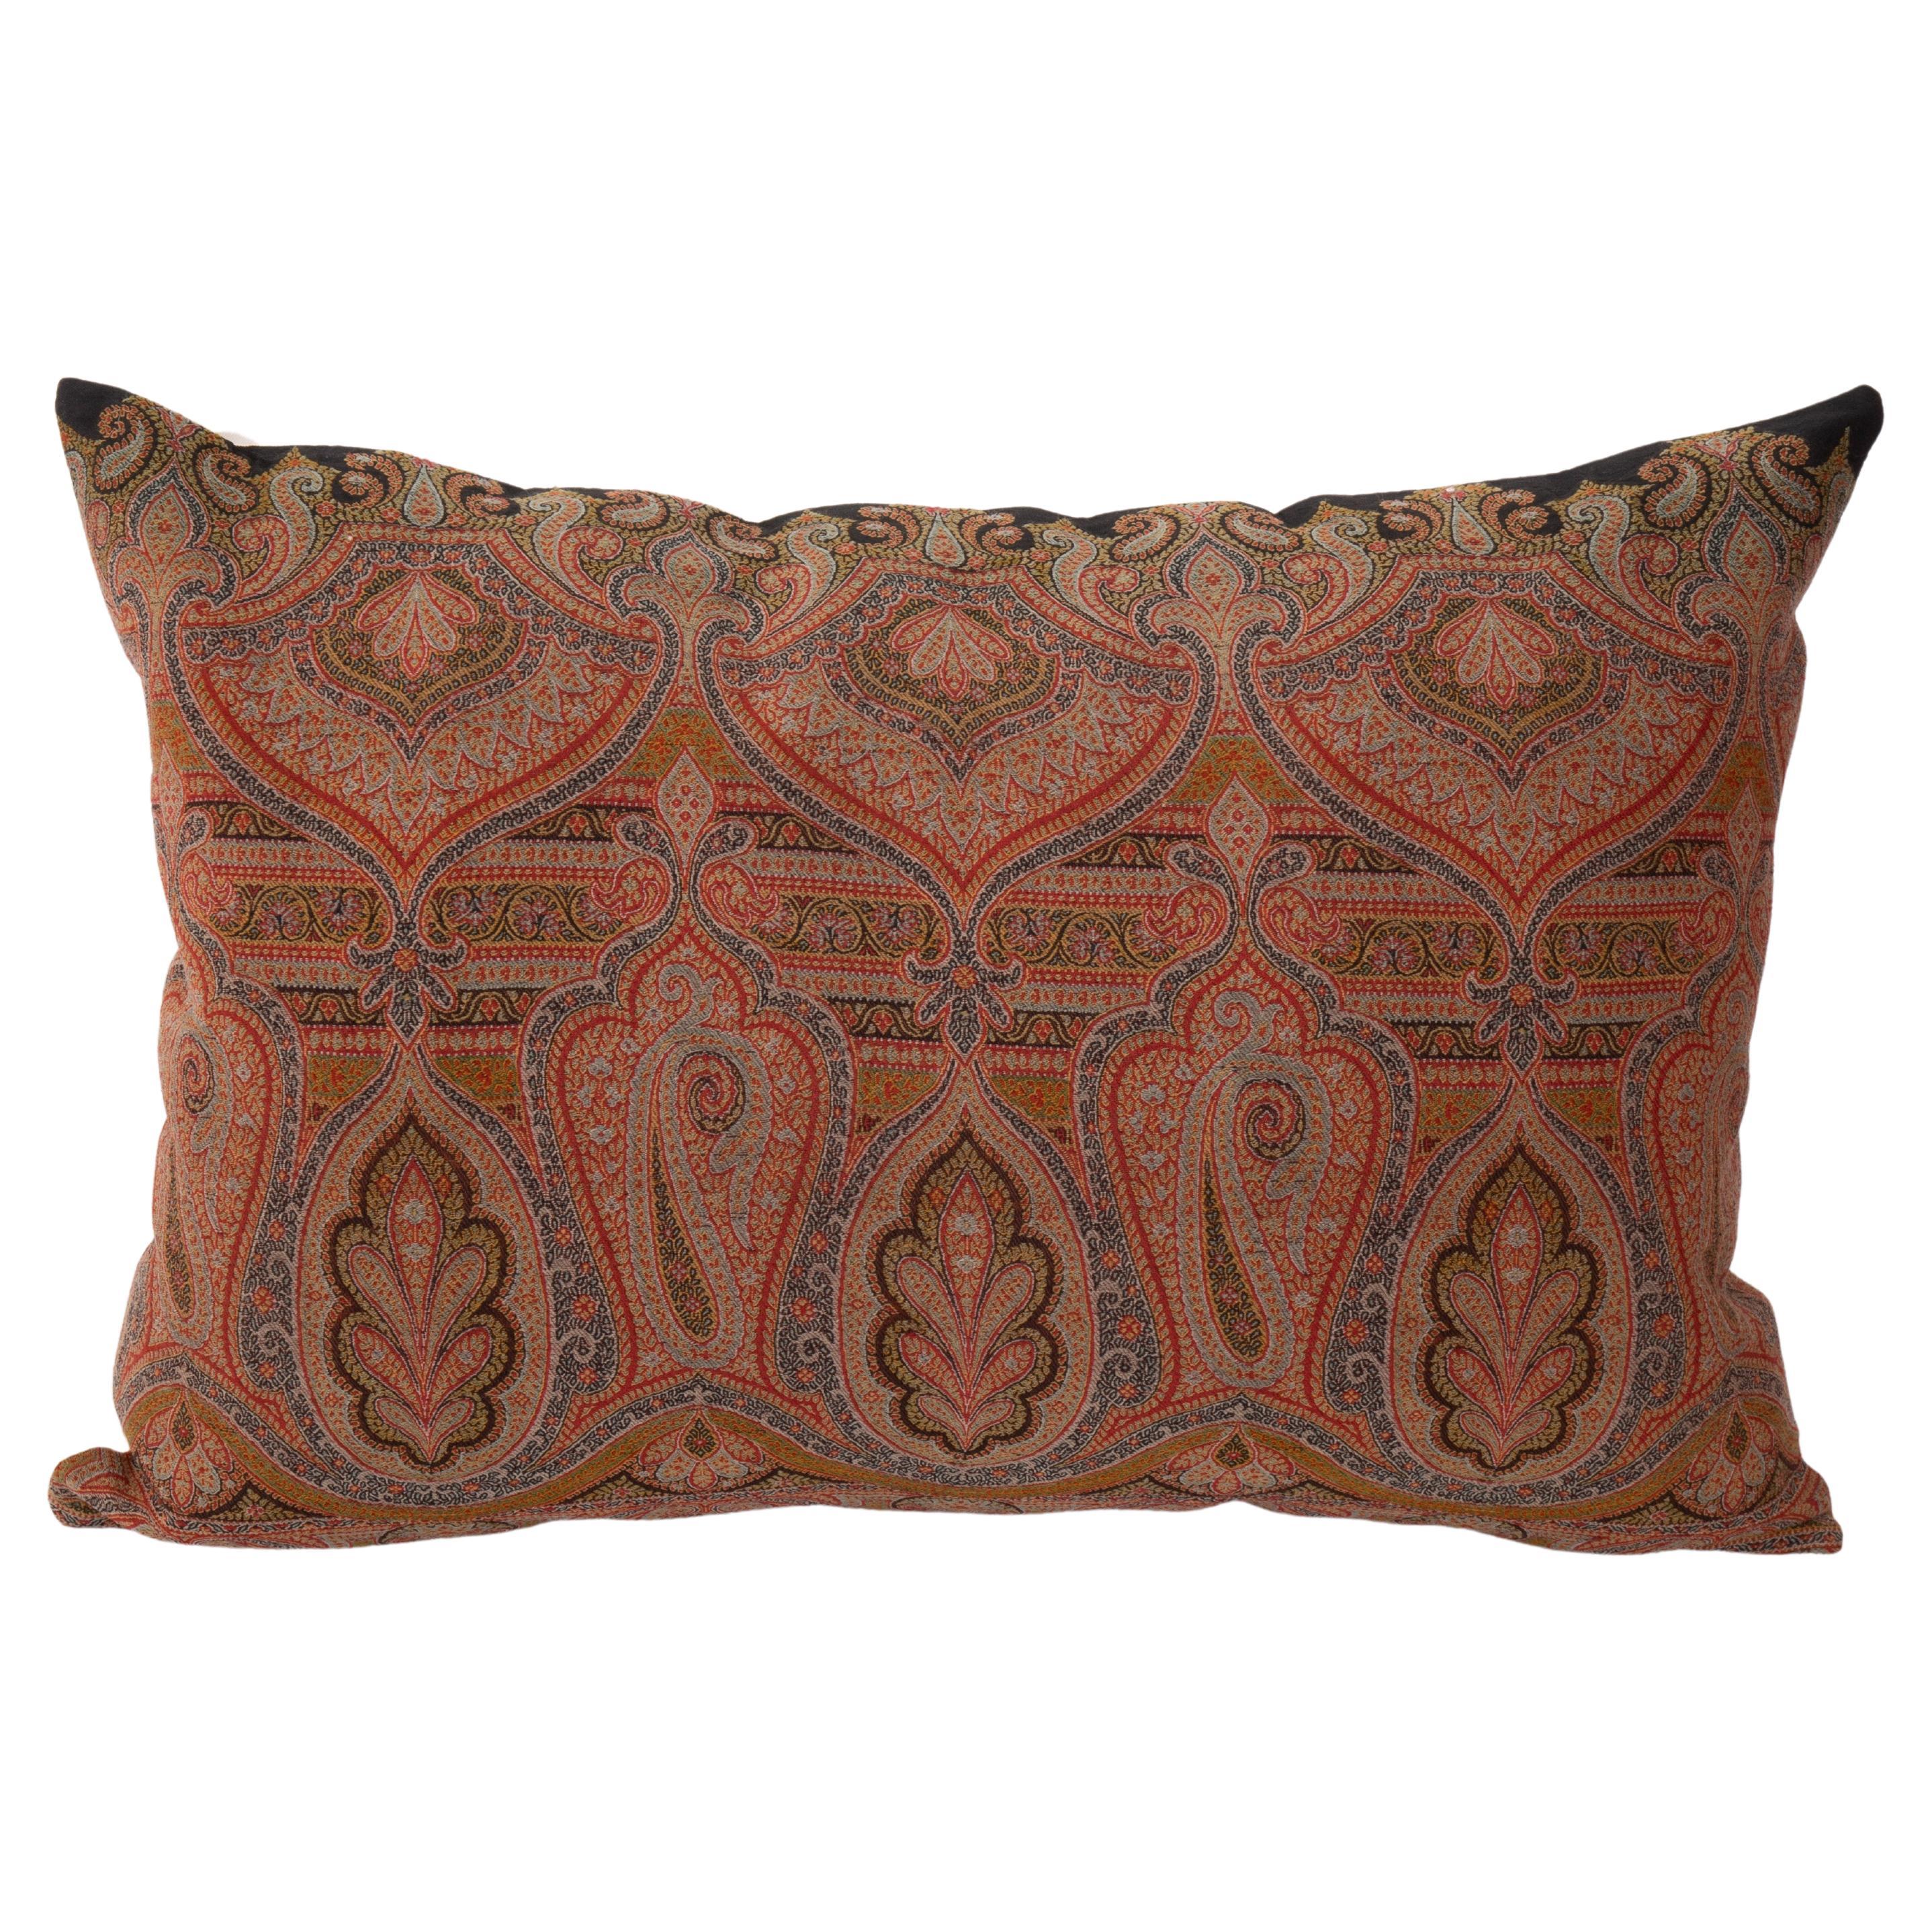 Antique Pillow Cover Made from a European Wool Paisley Shawl, L 19th/ E.20th